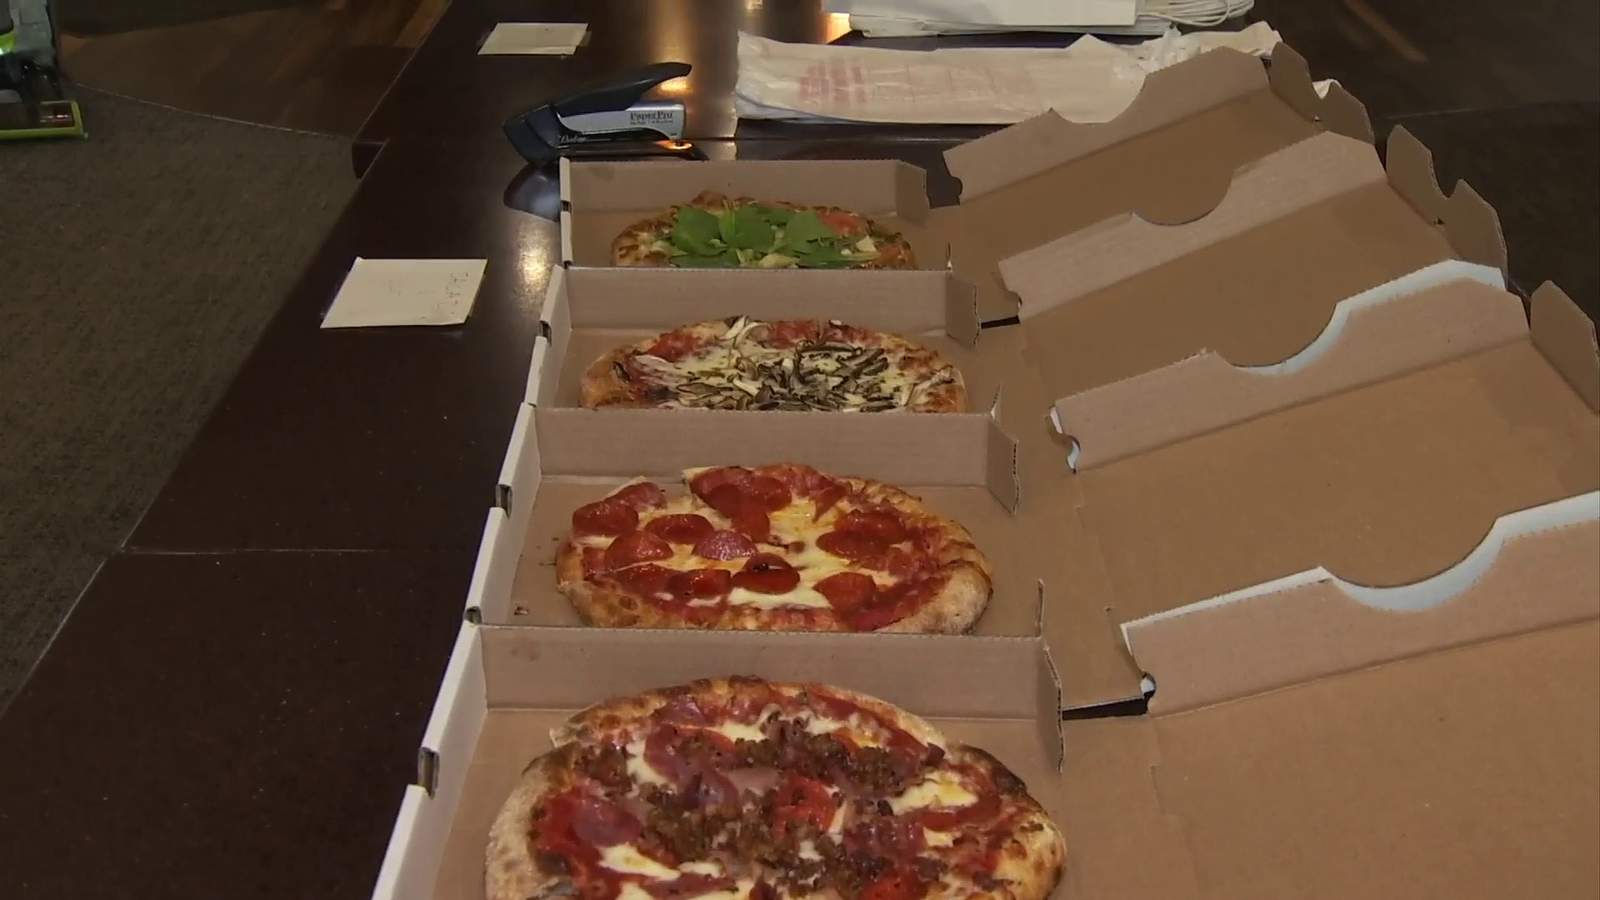 TAKEOUT TUESDAY: Tizzone gets you included on the pizza-making fun